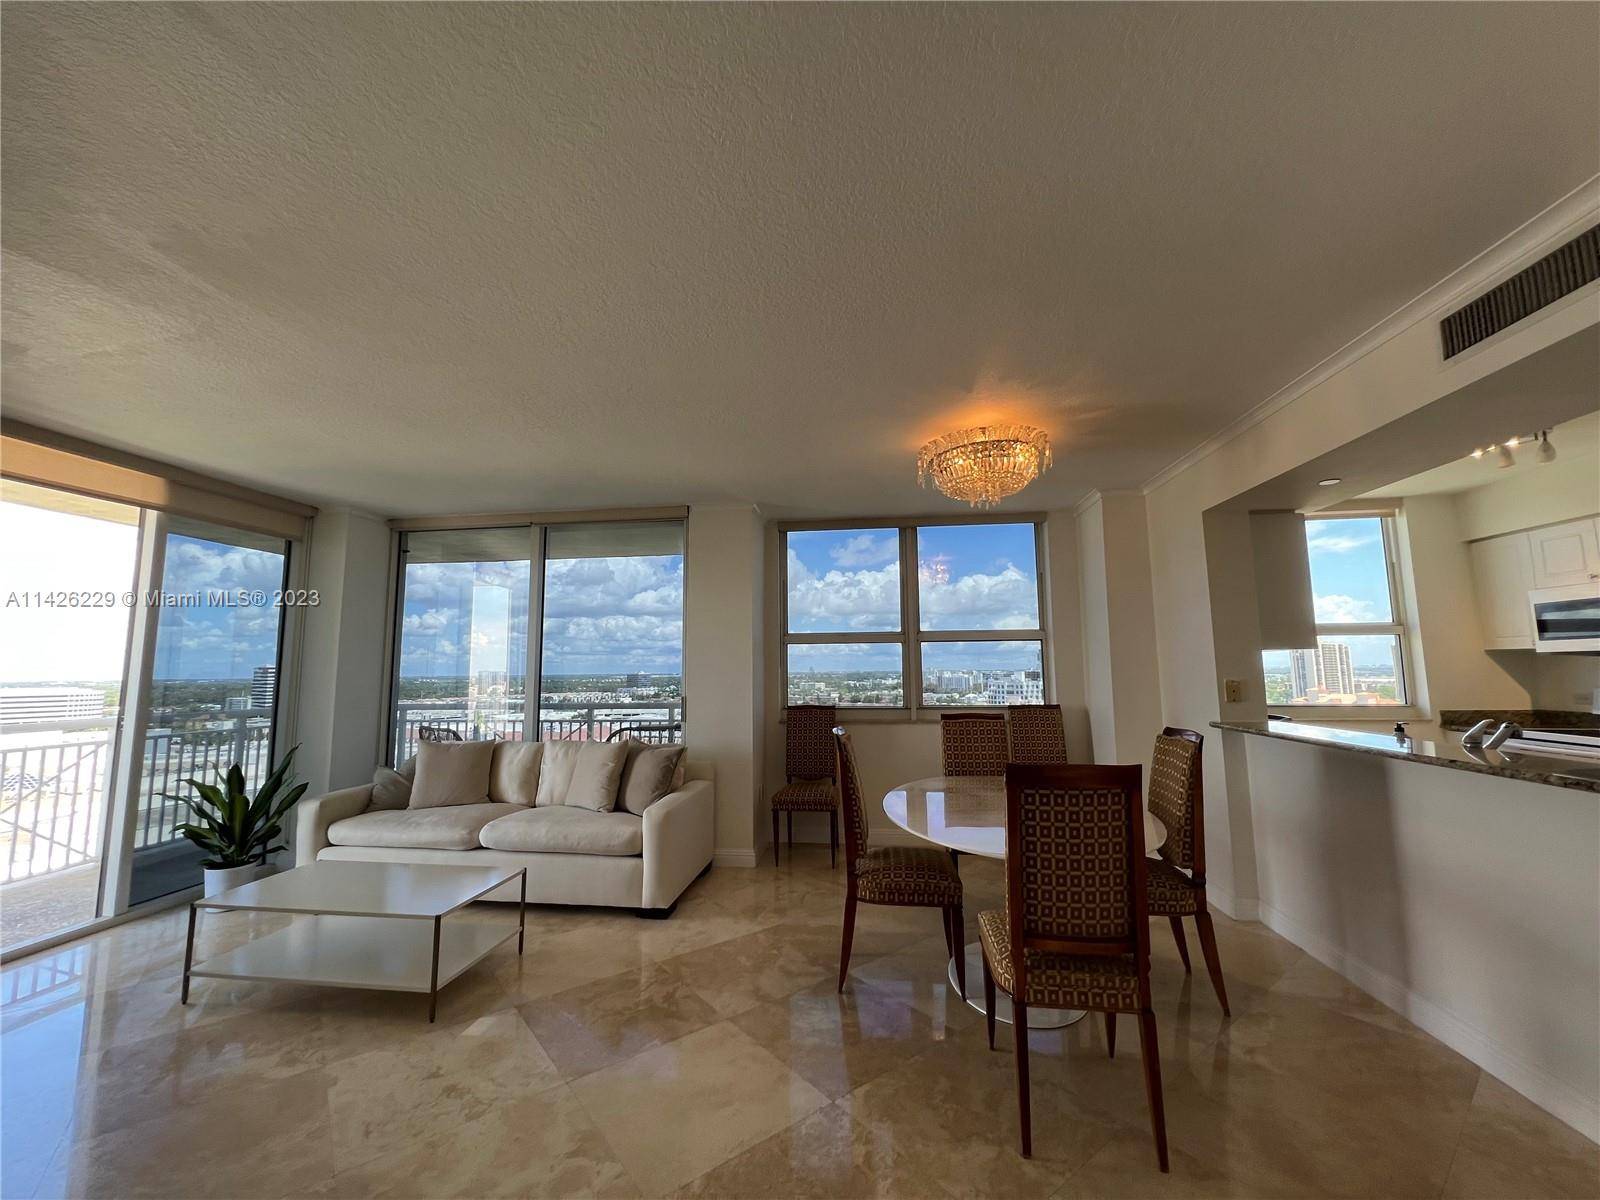 Discover a tastefully furnished 2 bed, 2 bath apartment in the luxurious Turnberry on the Green community in Aventura.